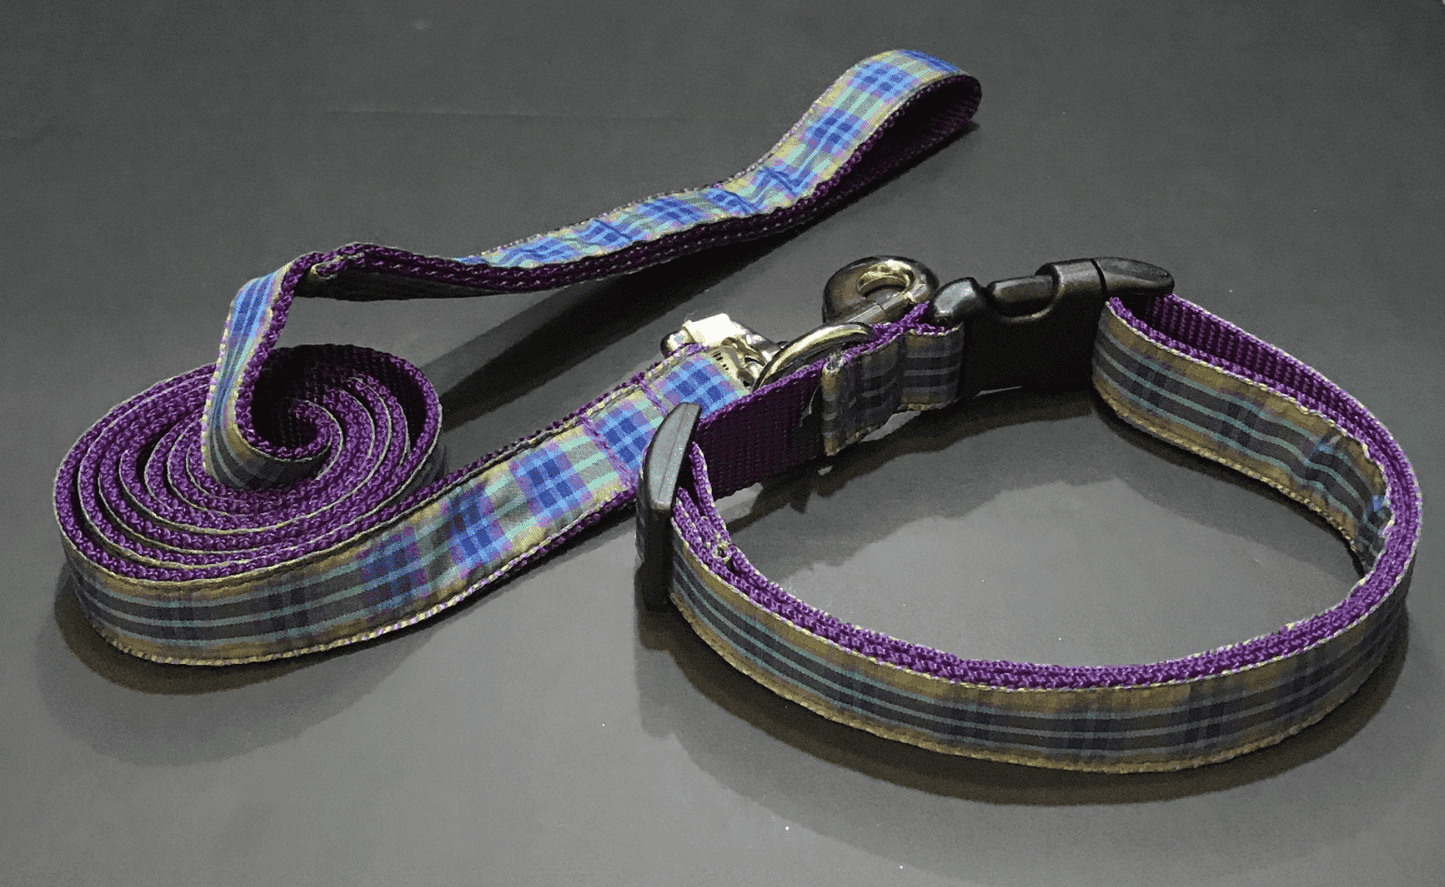 Blue Mainly Madras Dog Collars or Leads (1" Wide).